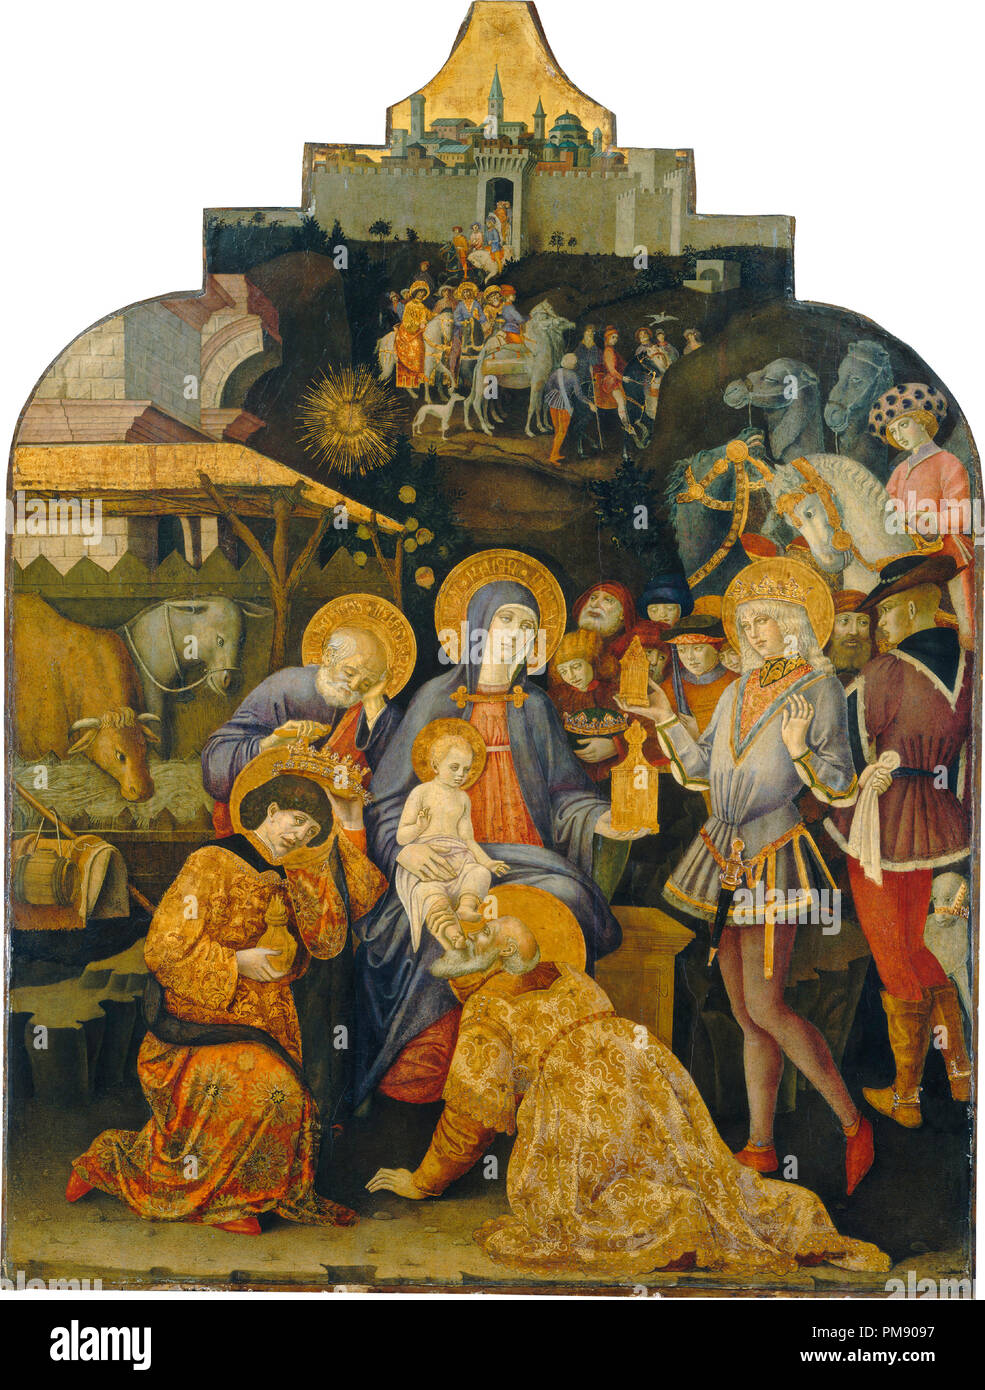 The Adoration of the Magi. Dated: c. 1470/1475. Dimensions: overall: 182 x 137 cm (71 5/8 x 53 15/16 in.)  framed: 207.7 x 150.5 x 11.4 cm (81 3/4 x 59 1/4 x 4 1/2 in.). Medium: tempera on panel. Museum: National Gallery of Art, Washington DC. Author: BENVENUTO DI GIOVANNI. Stock Photo